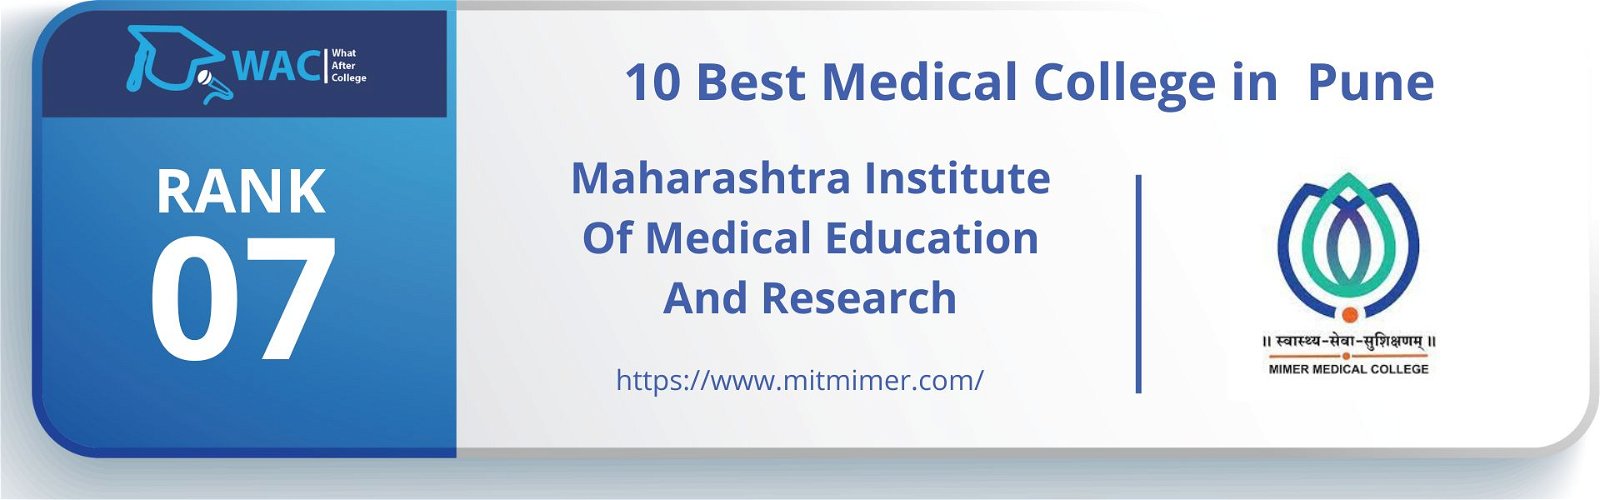 Rank: 7 Maharashtra Institute Of Medical Education And Research